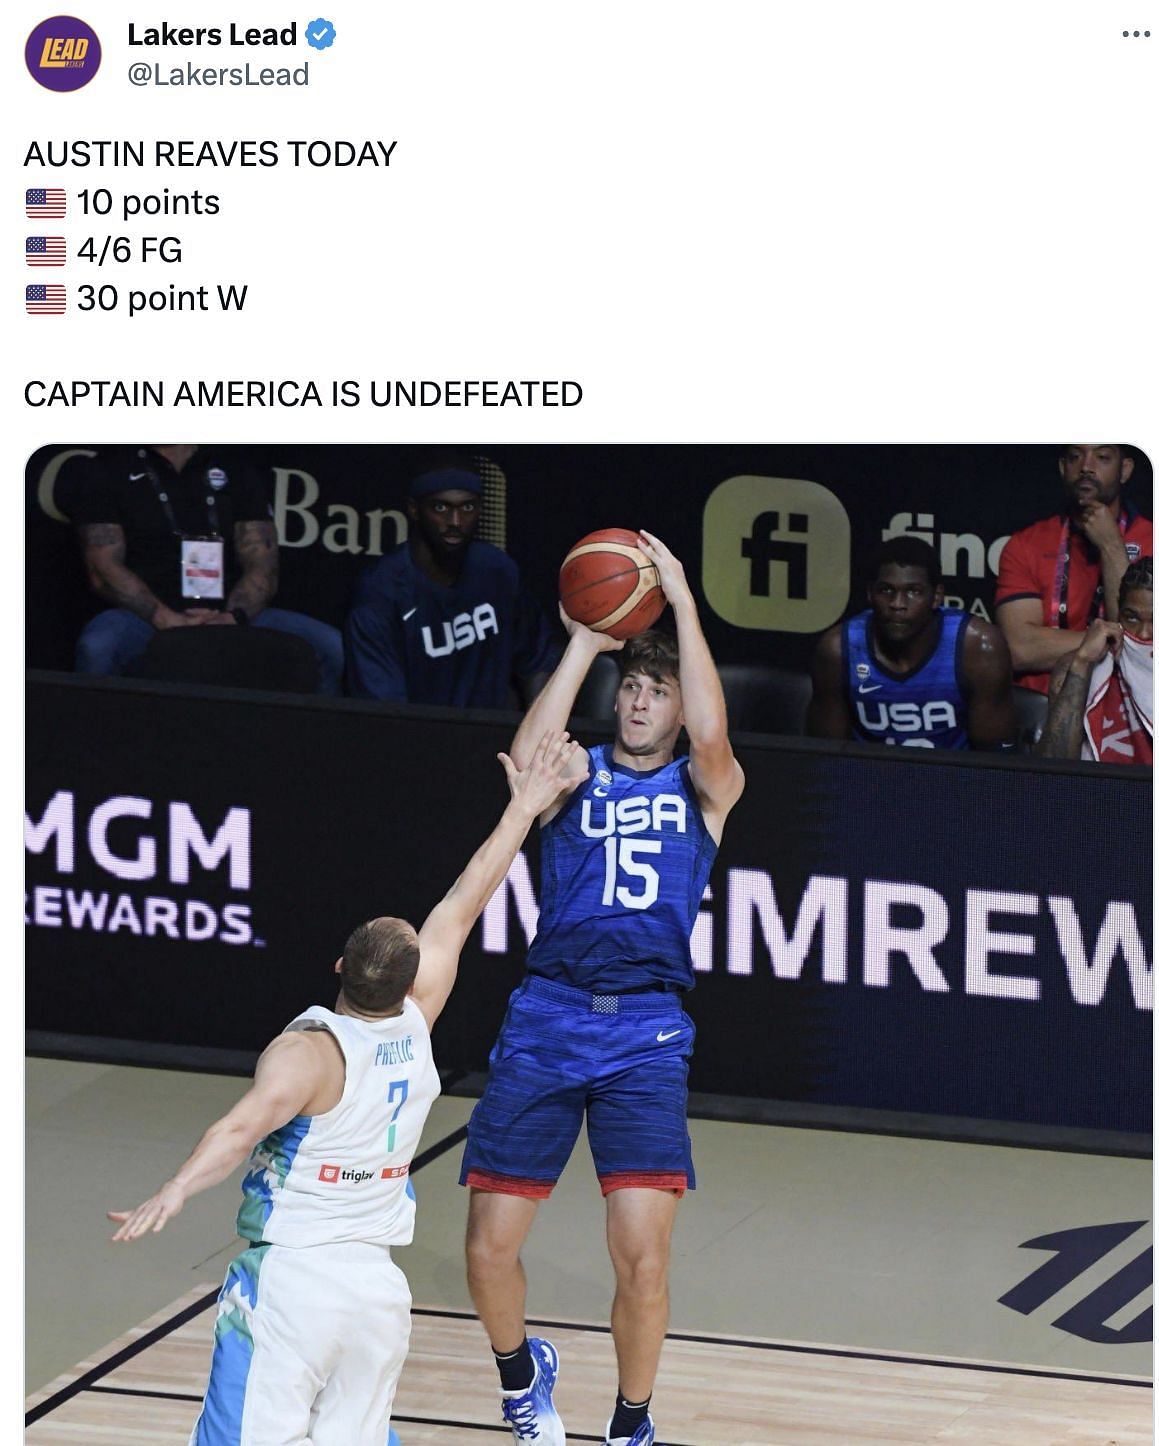 CAPTAIN AMERICA IS UNDEFEATED: Fans react to Austin Reaves and Team USA  obliterating a Luka Doncic-less Slovenia by 30 points